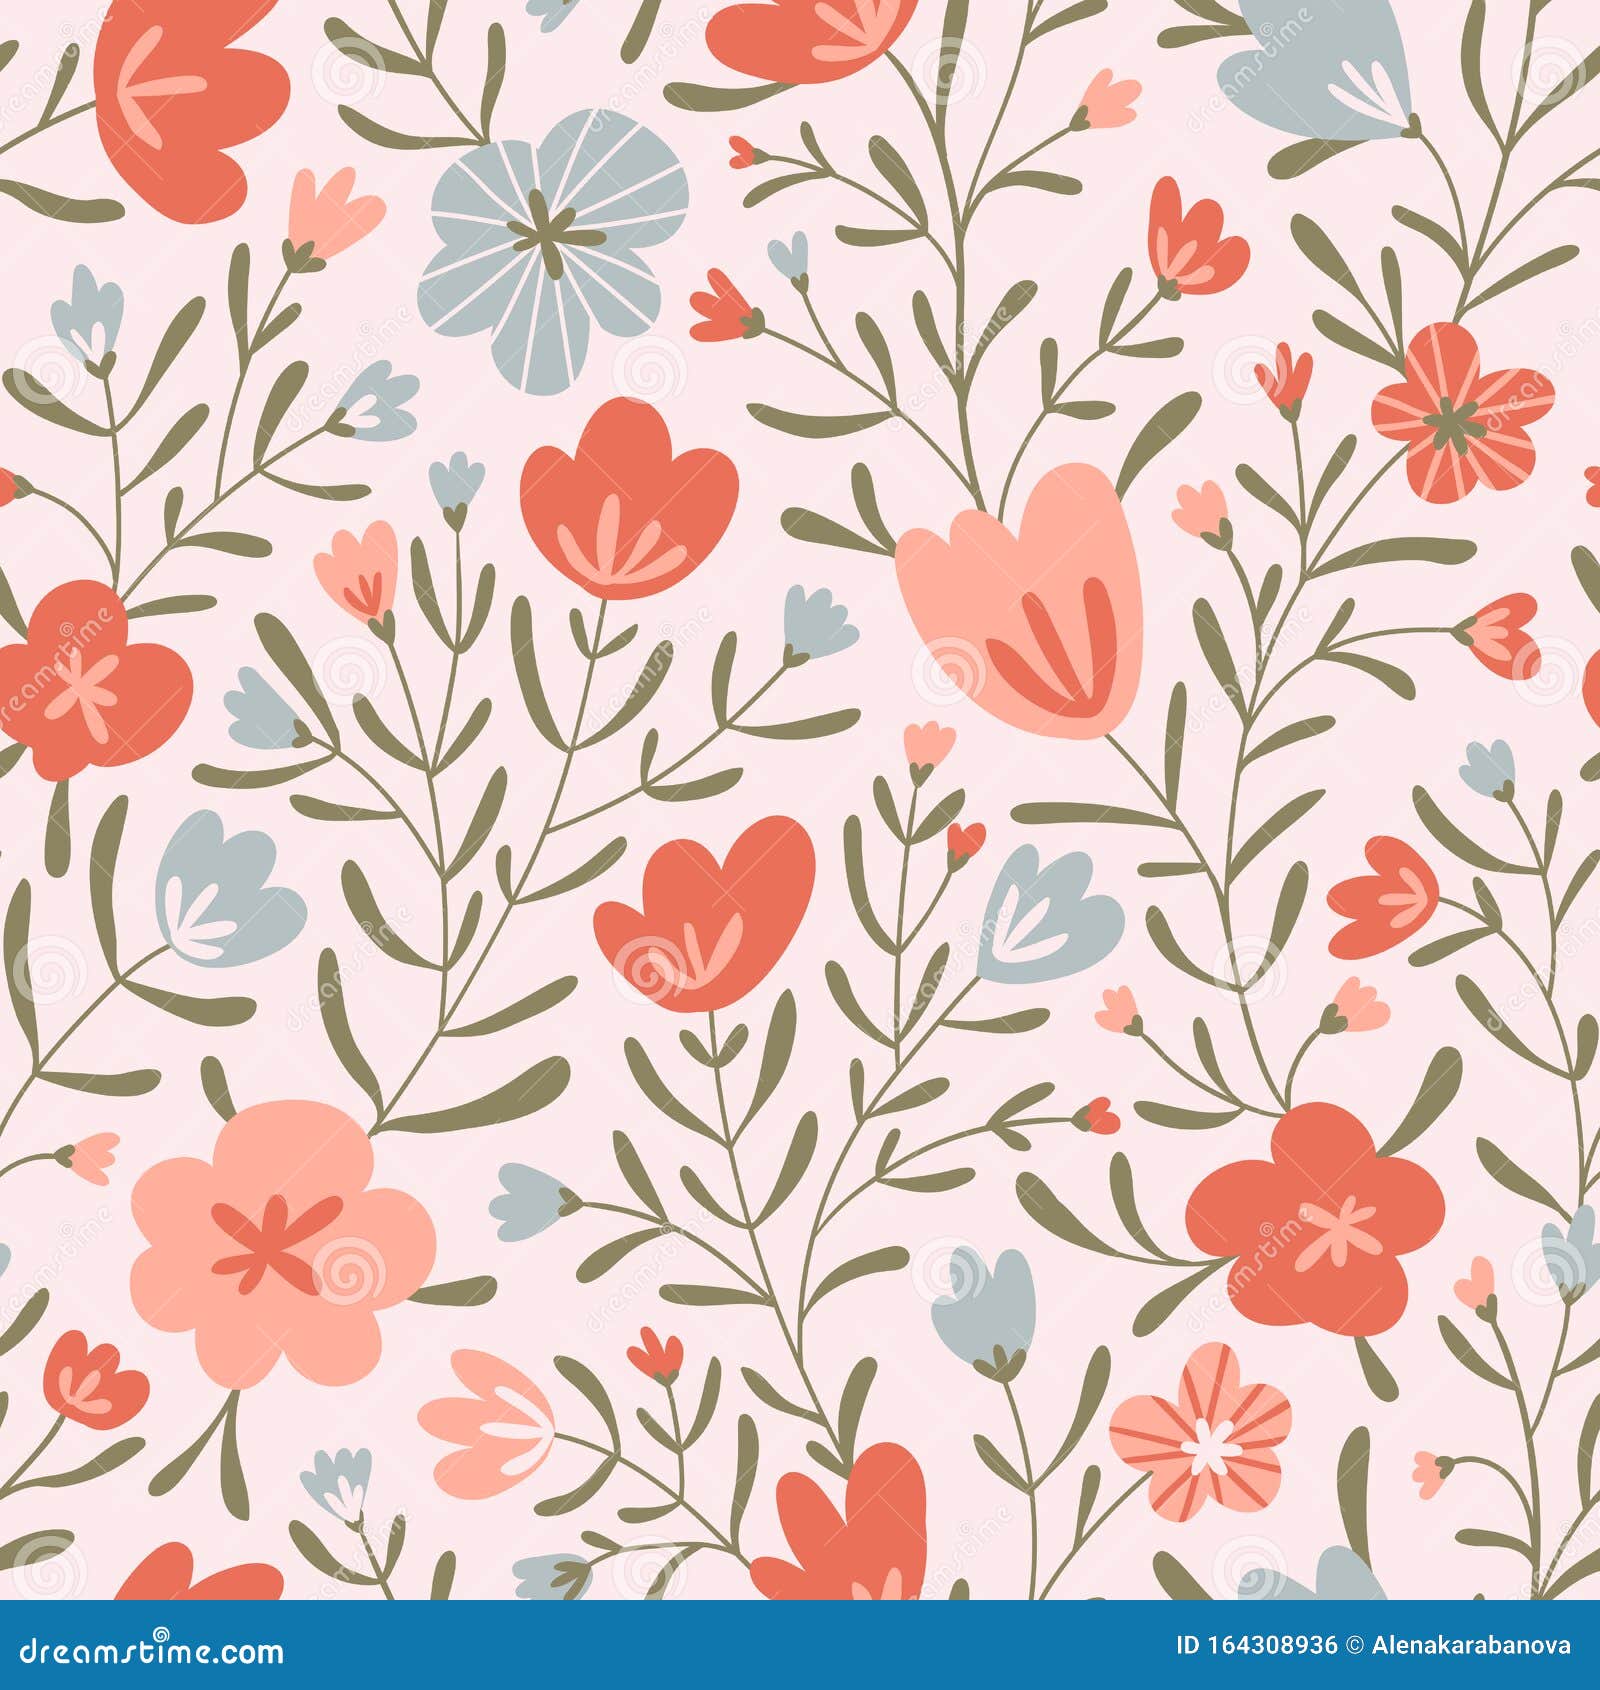 Trendy Seamless Floral Ditsy Pattern. Fabric Design with Simple Flowers  Stock Illustration - Illustration of modern, beauty: 164308936